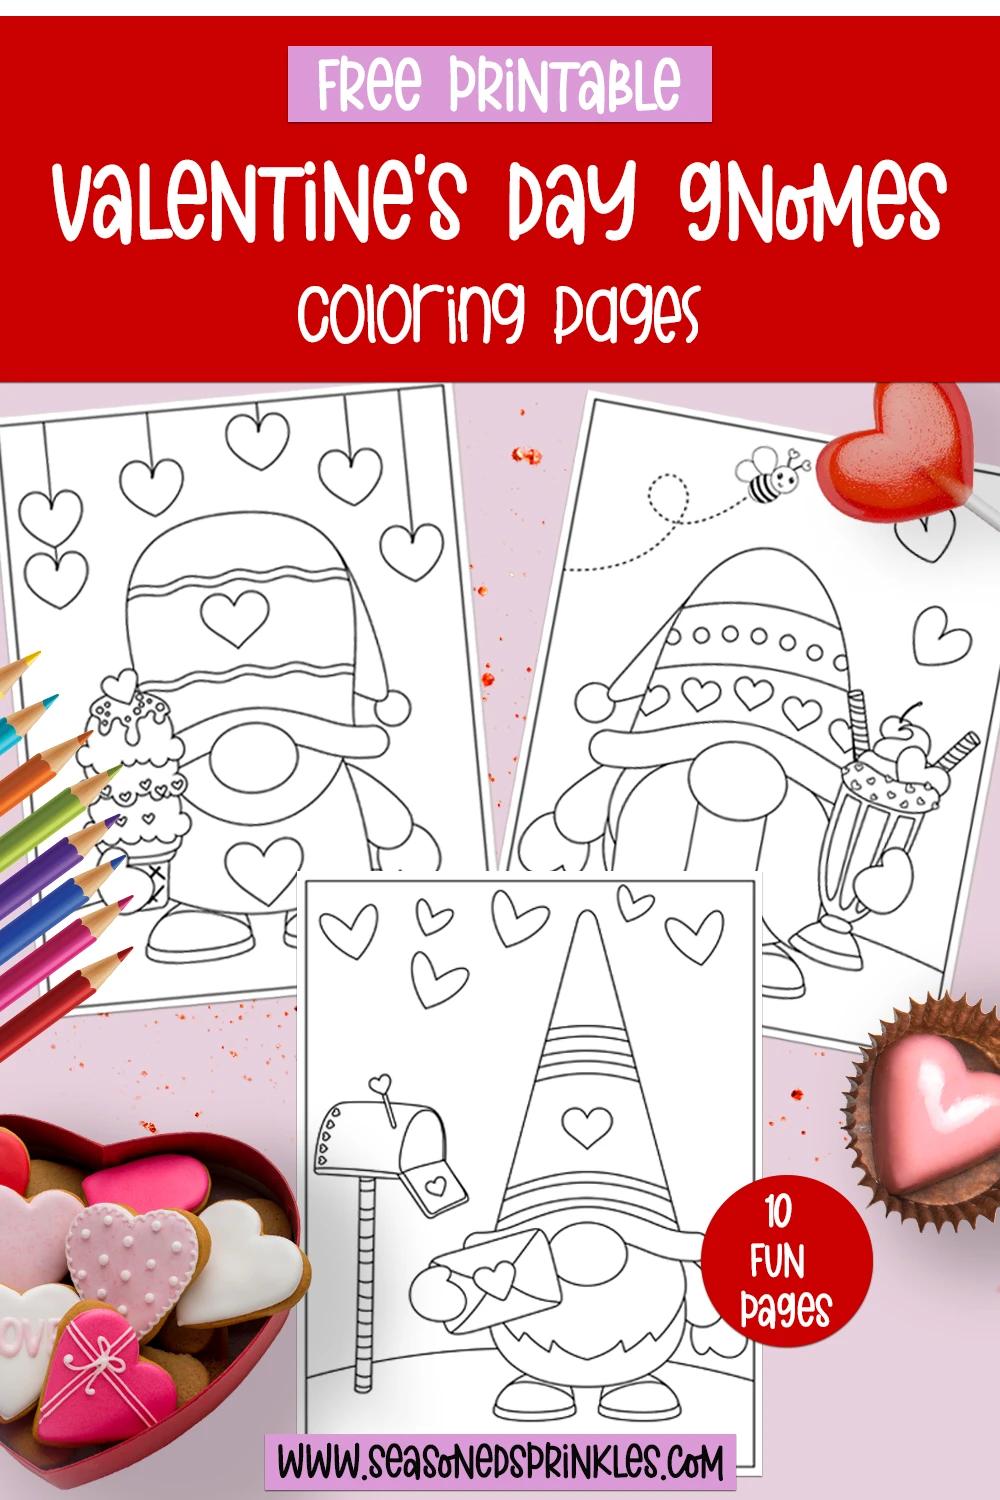 Free valentines day coloring pages valentines day gnomes